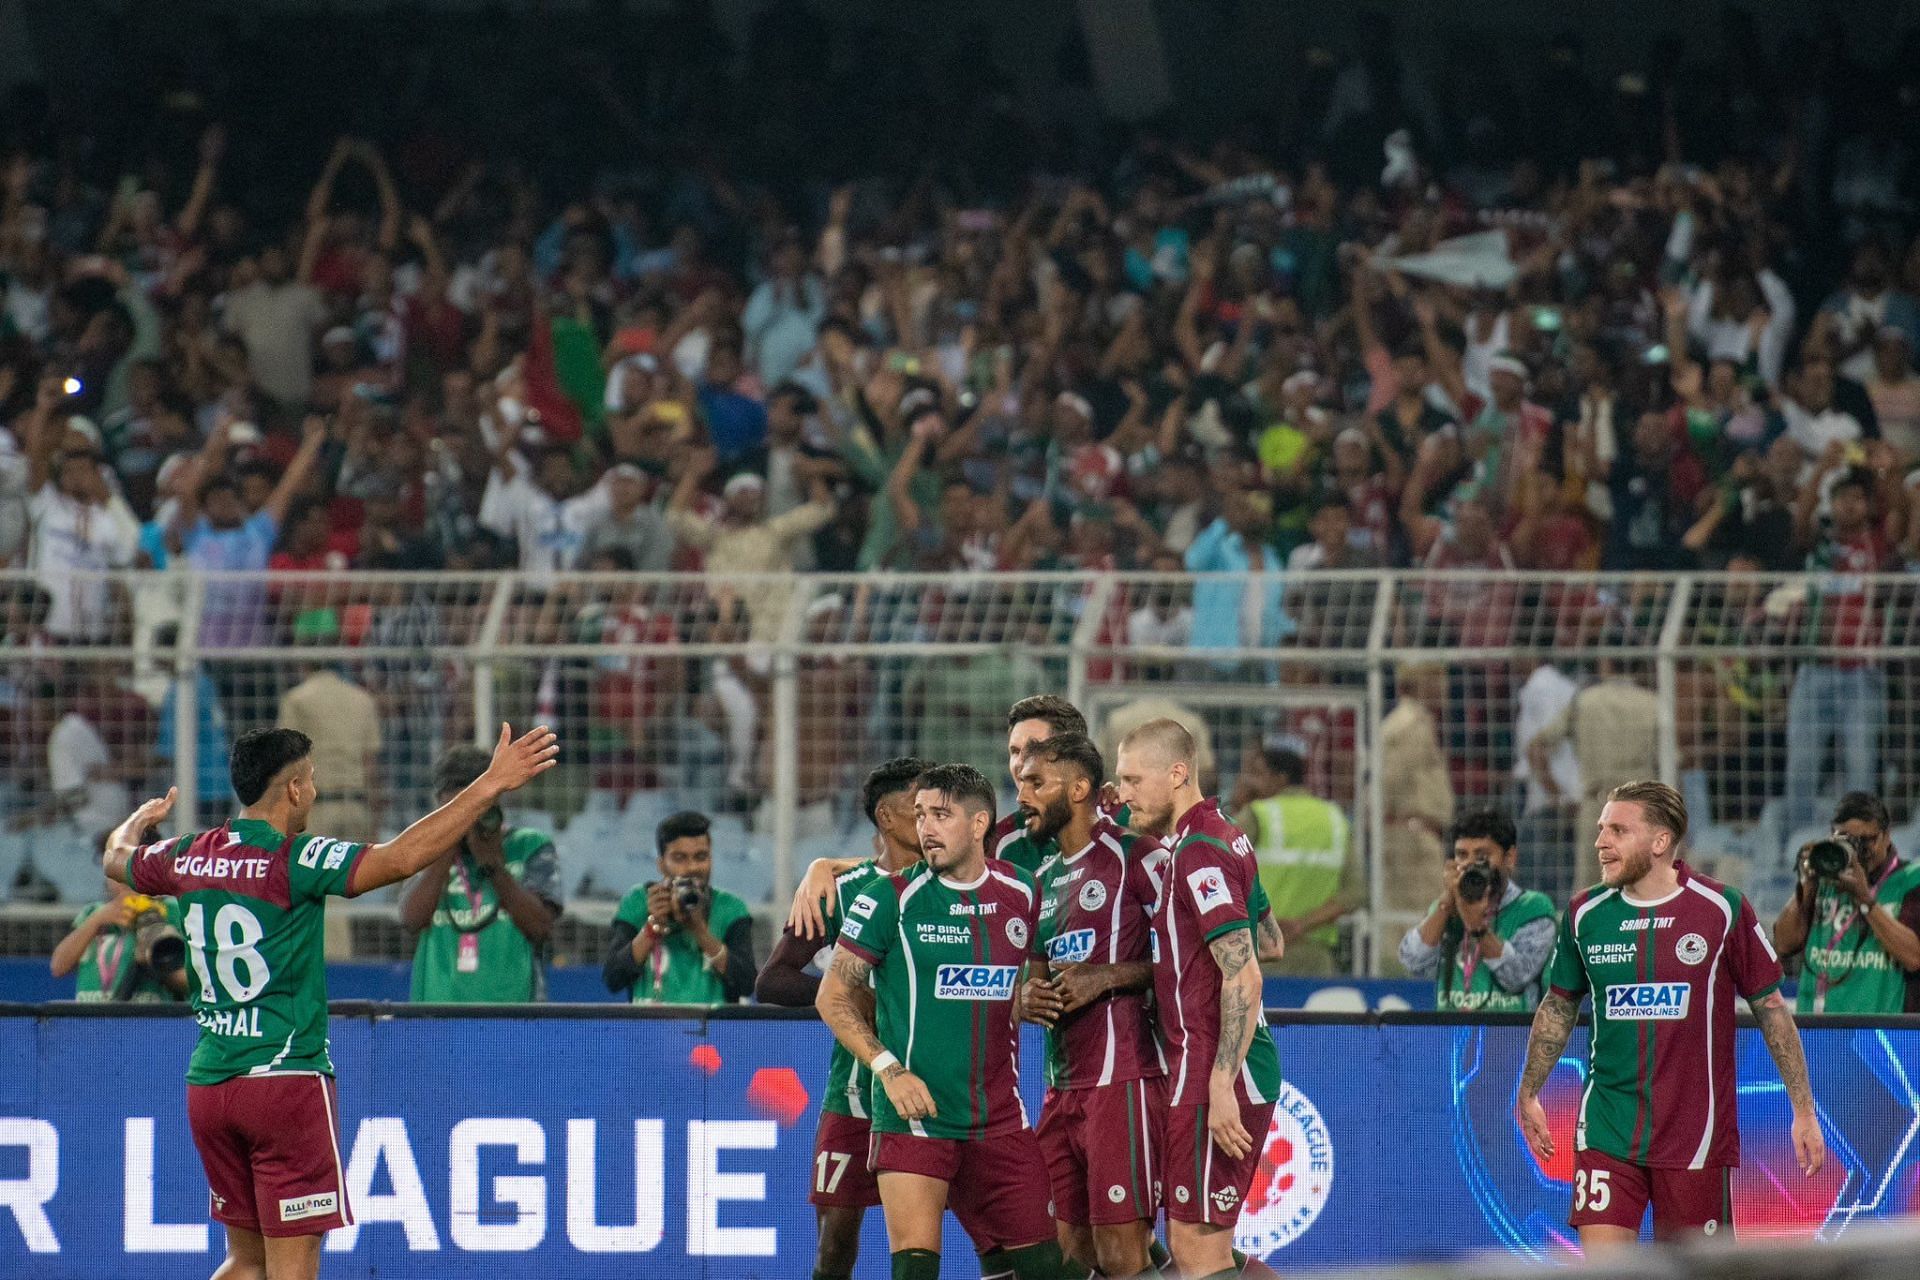 Mohun Bagan SG scored three goals in the first half against East Bengal.